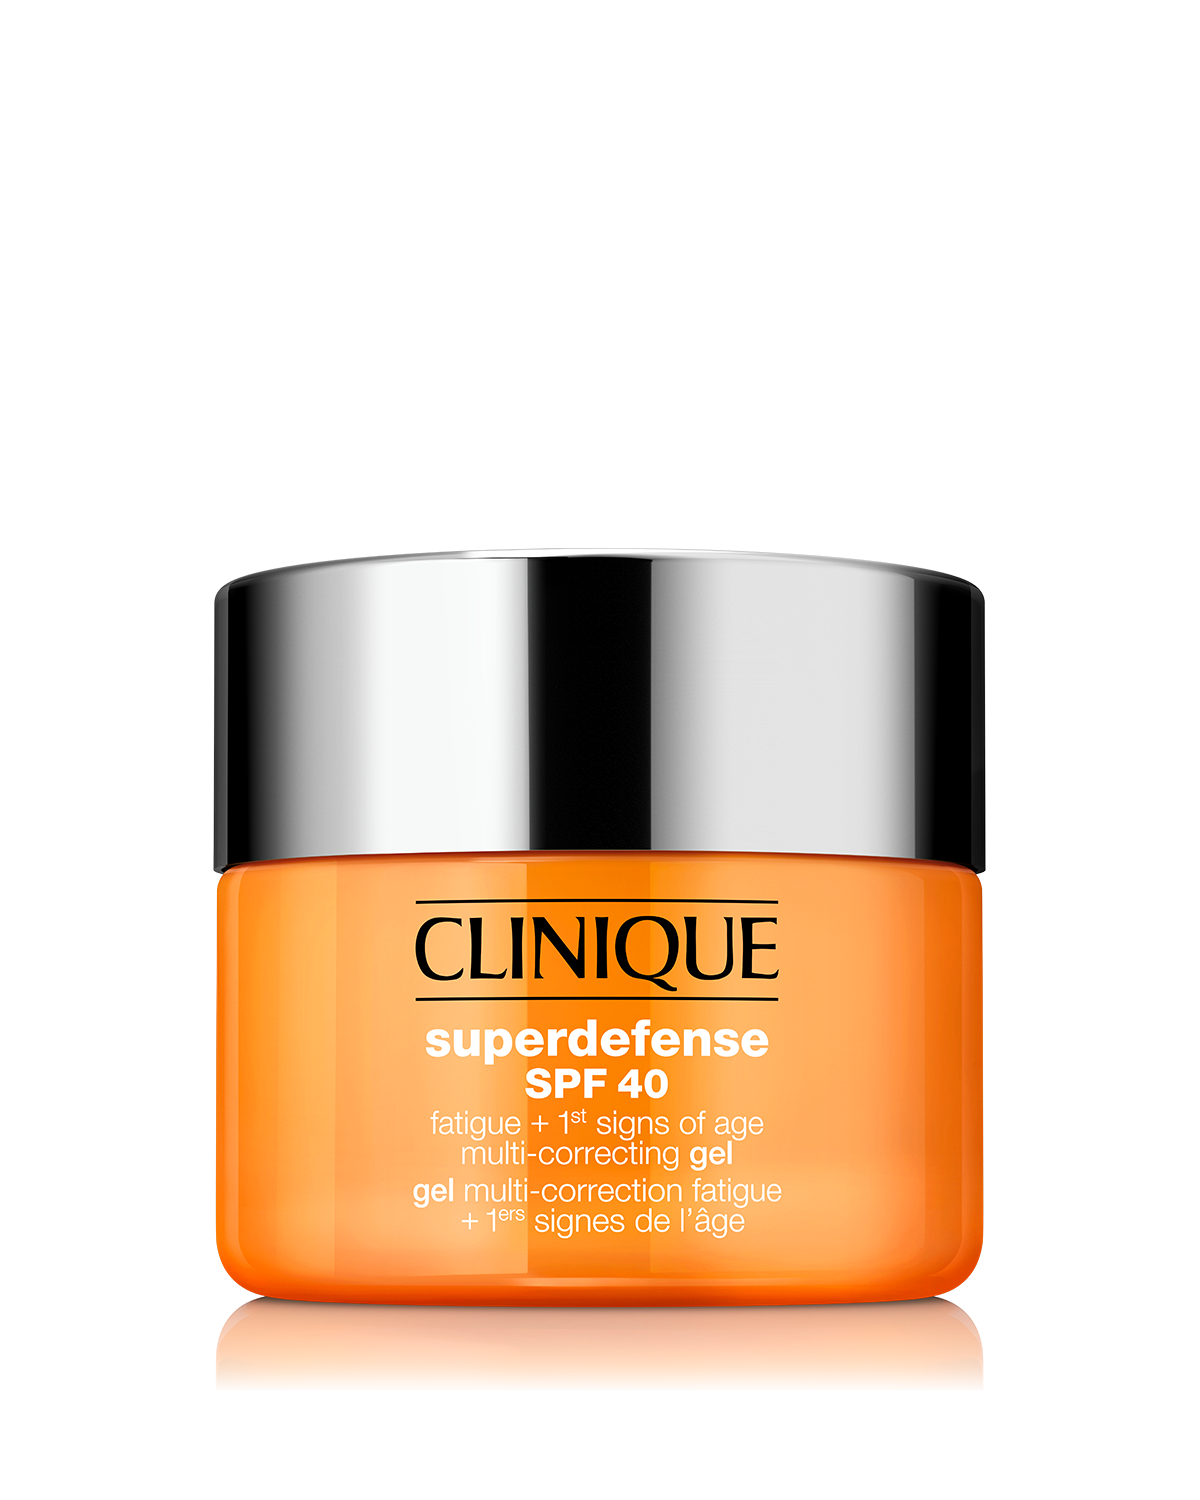 Superdefense™ SPF 40 Fatigue + 1st Signs Of Age Multi-Correcting Gel